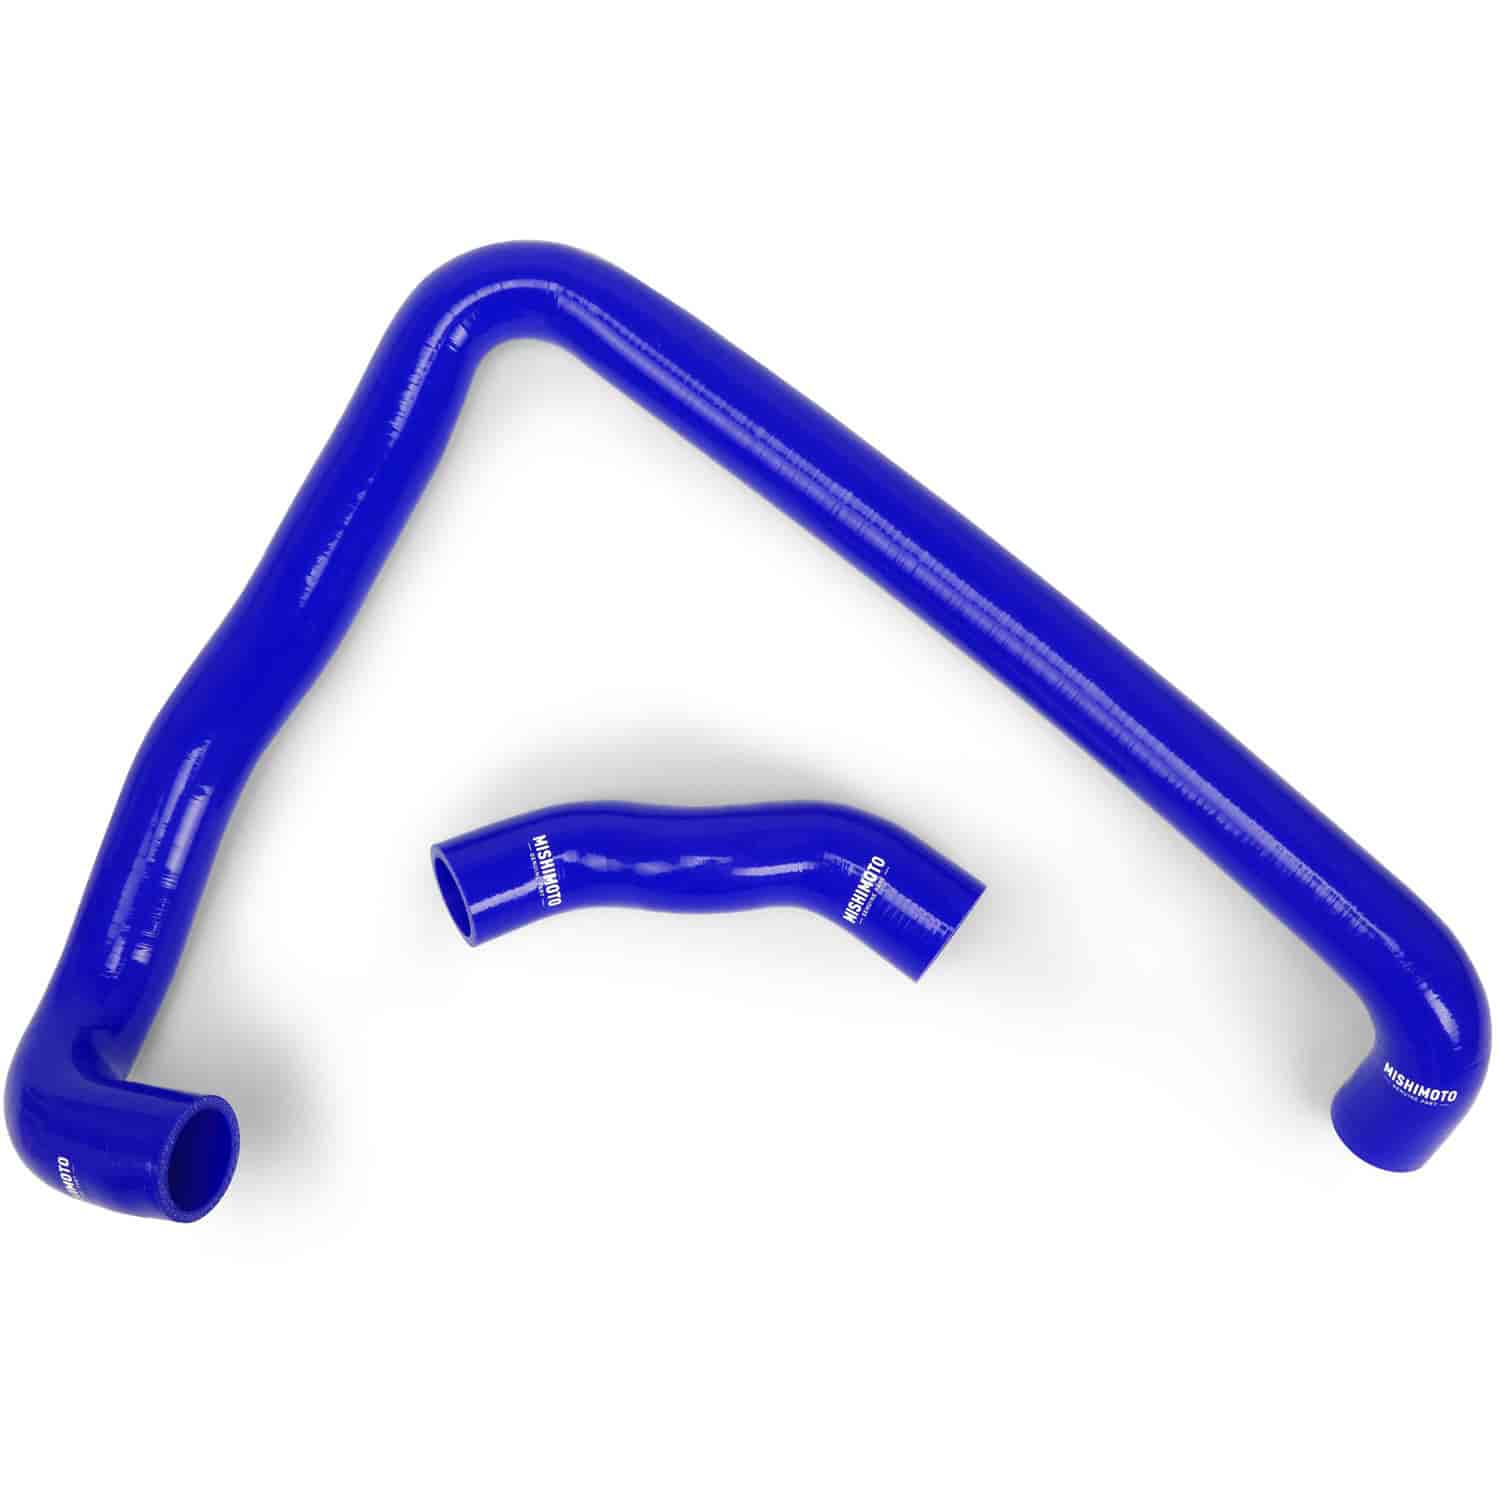 Nissan 300ZX Turbo Silicone Radiator Hose Kit - MFG Part No. MMHOSE-300ZX-90TBL